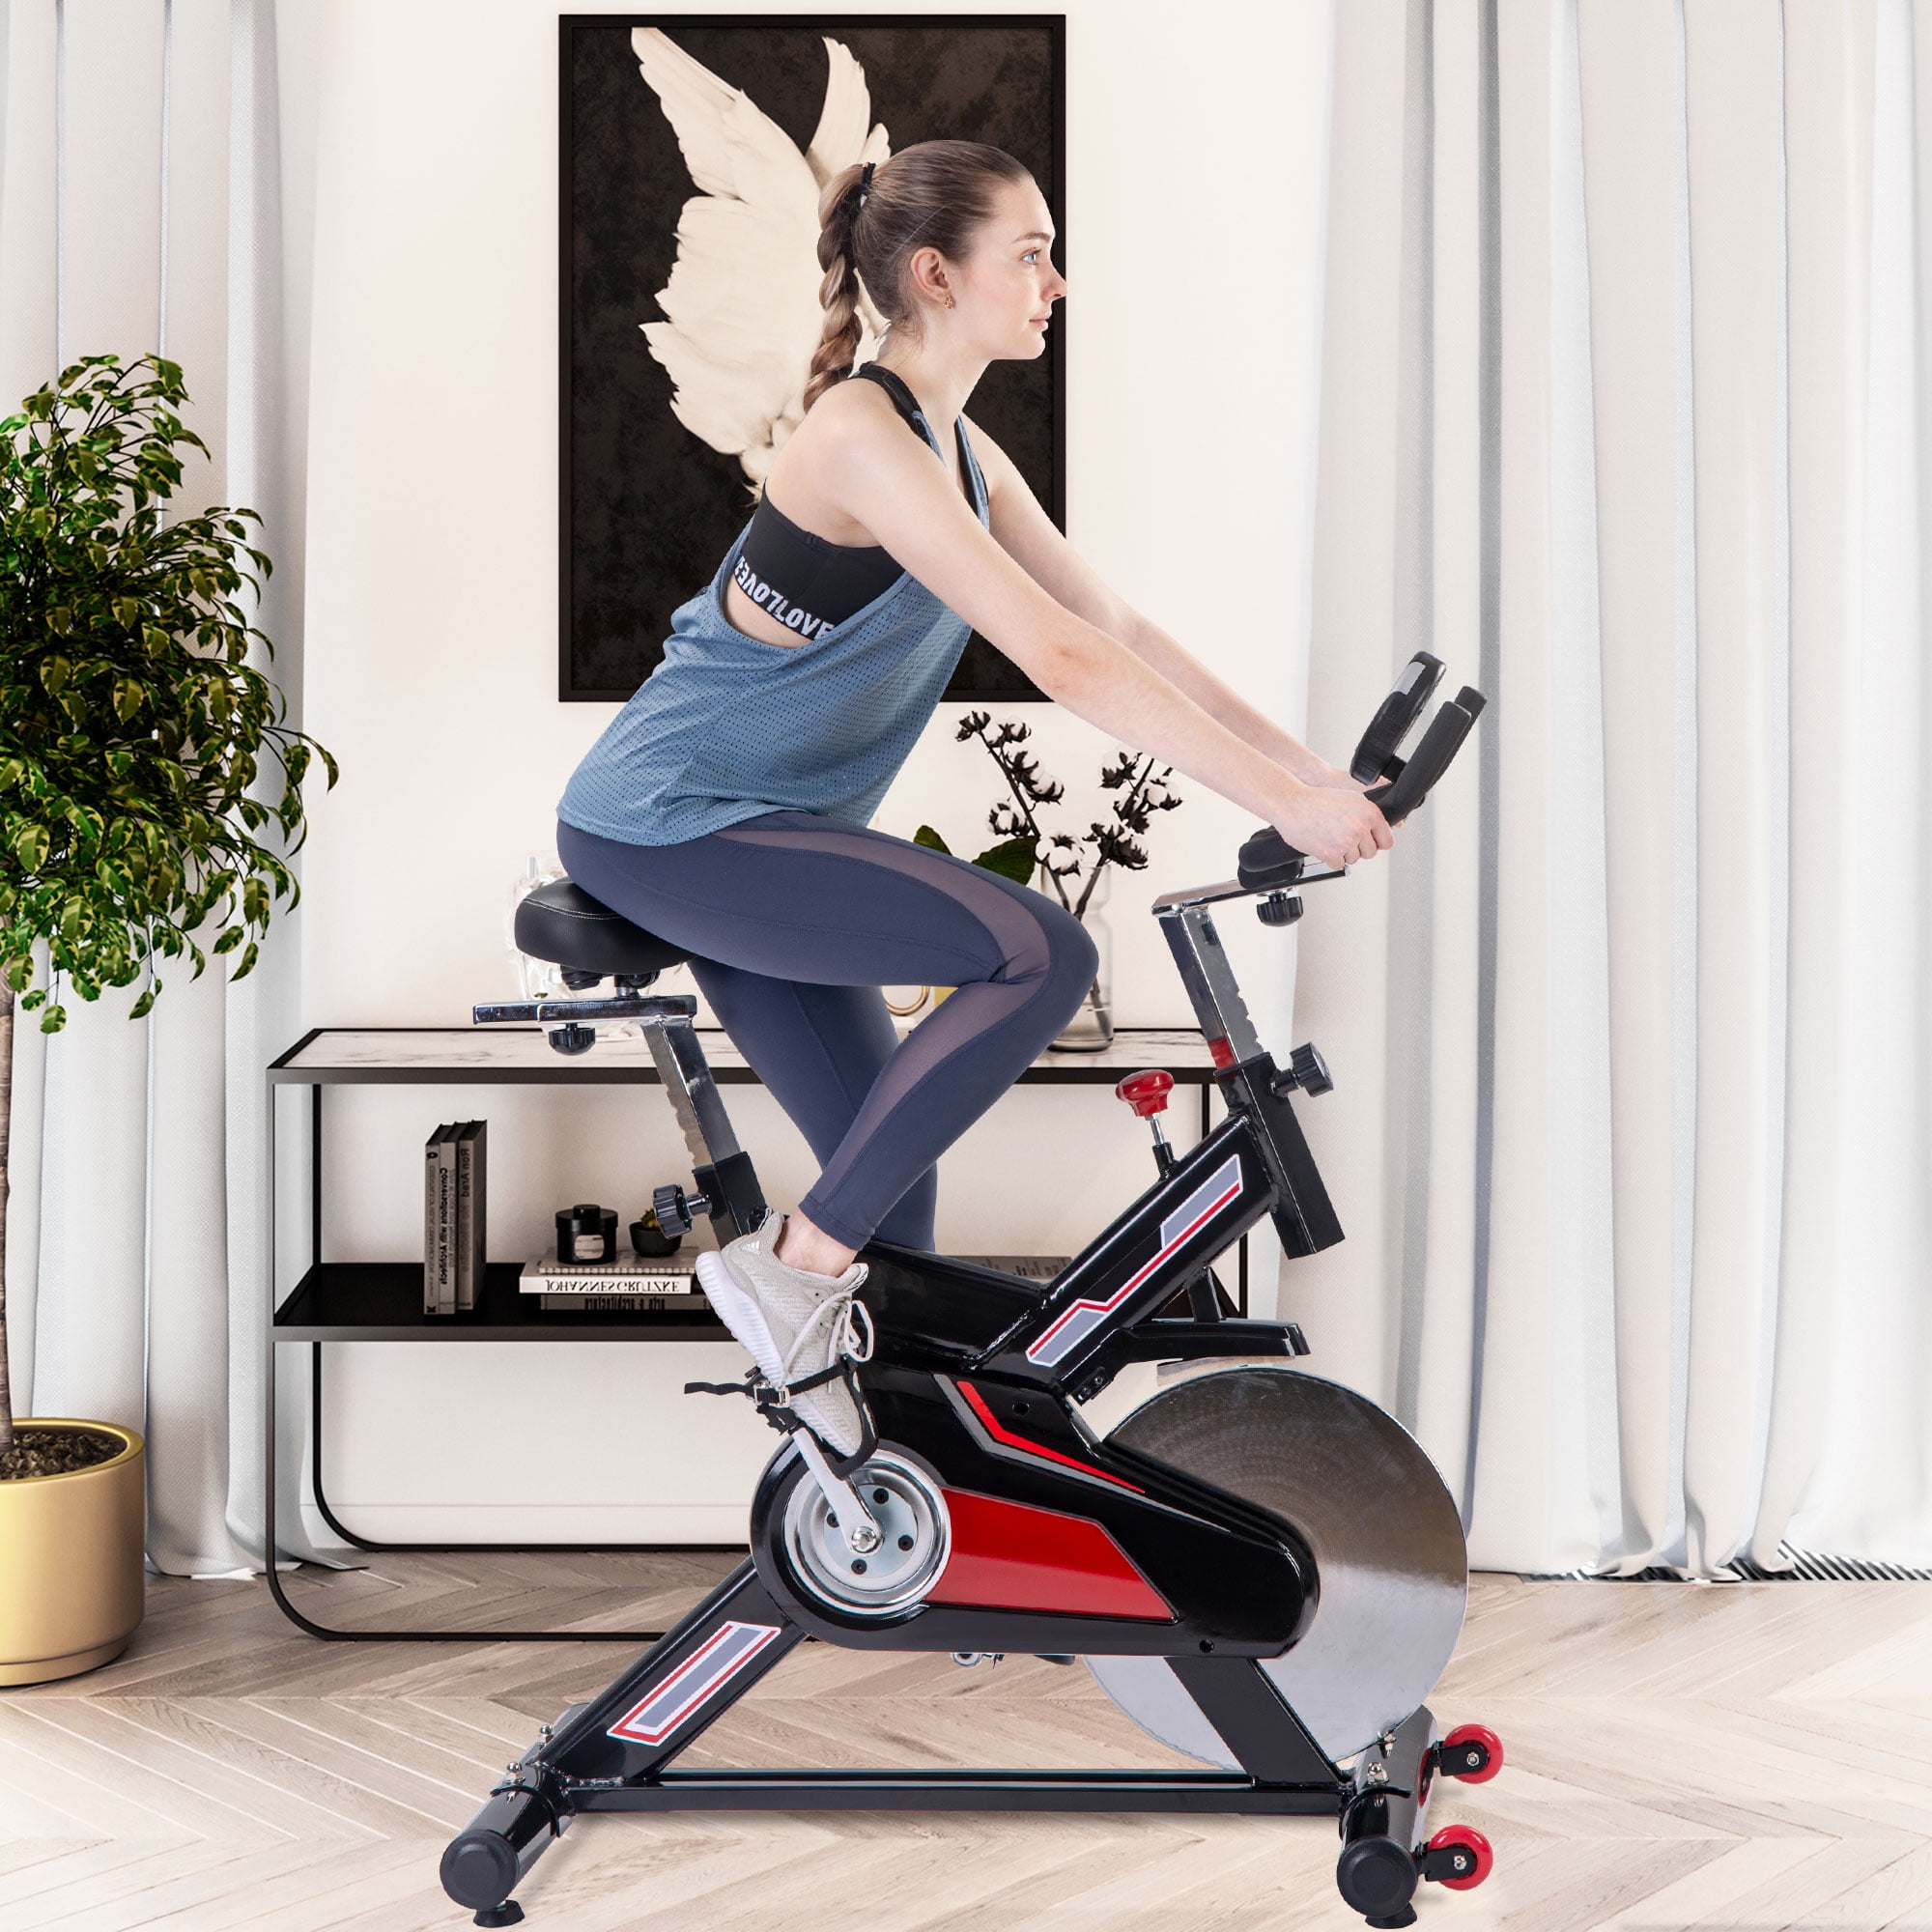 ULTRAPOWER Indoor Training Exercise Bike Fitness Home Gym 6KG Flywheel Bicycle 